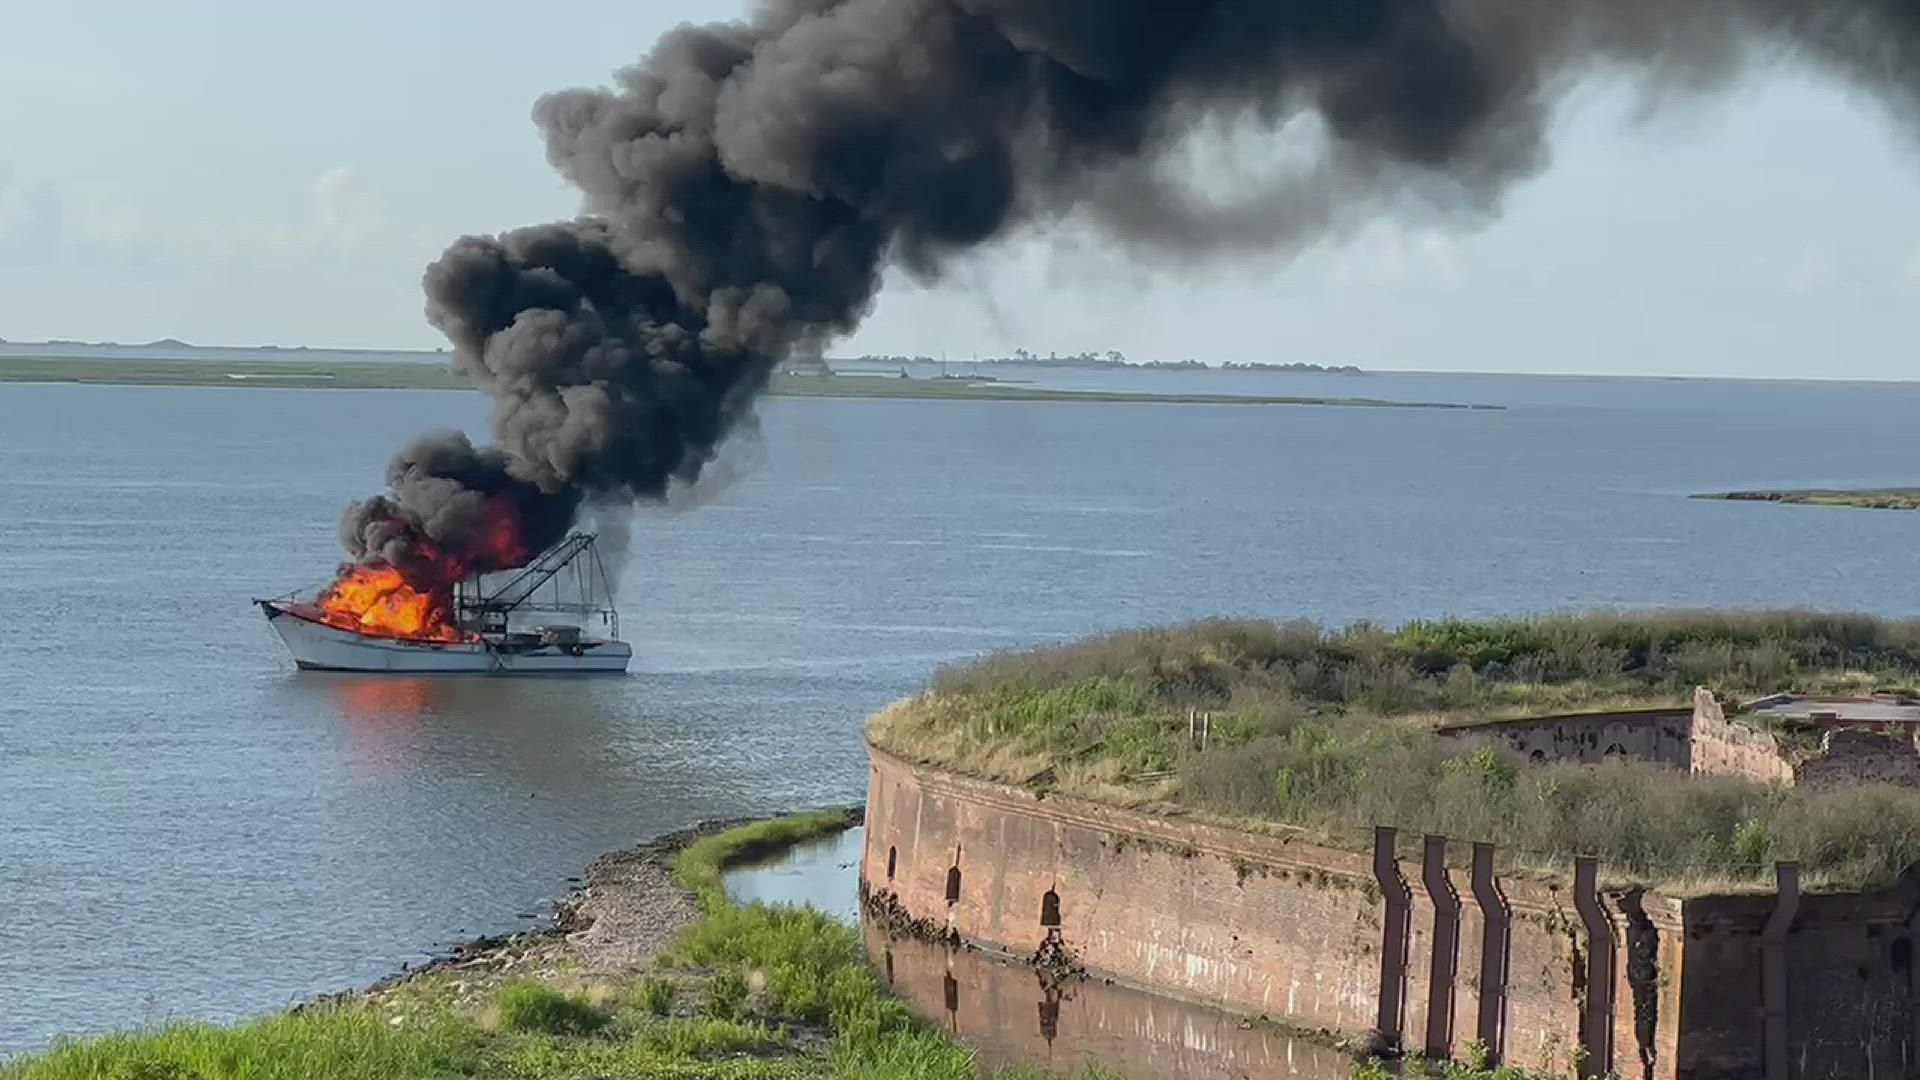 Shrimp boat engulfed in flames near Fort Pike